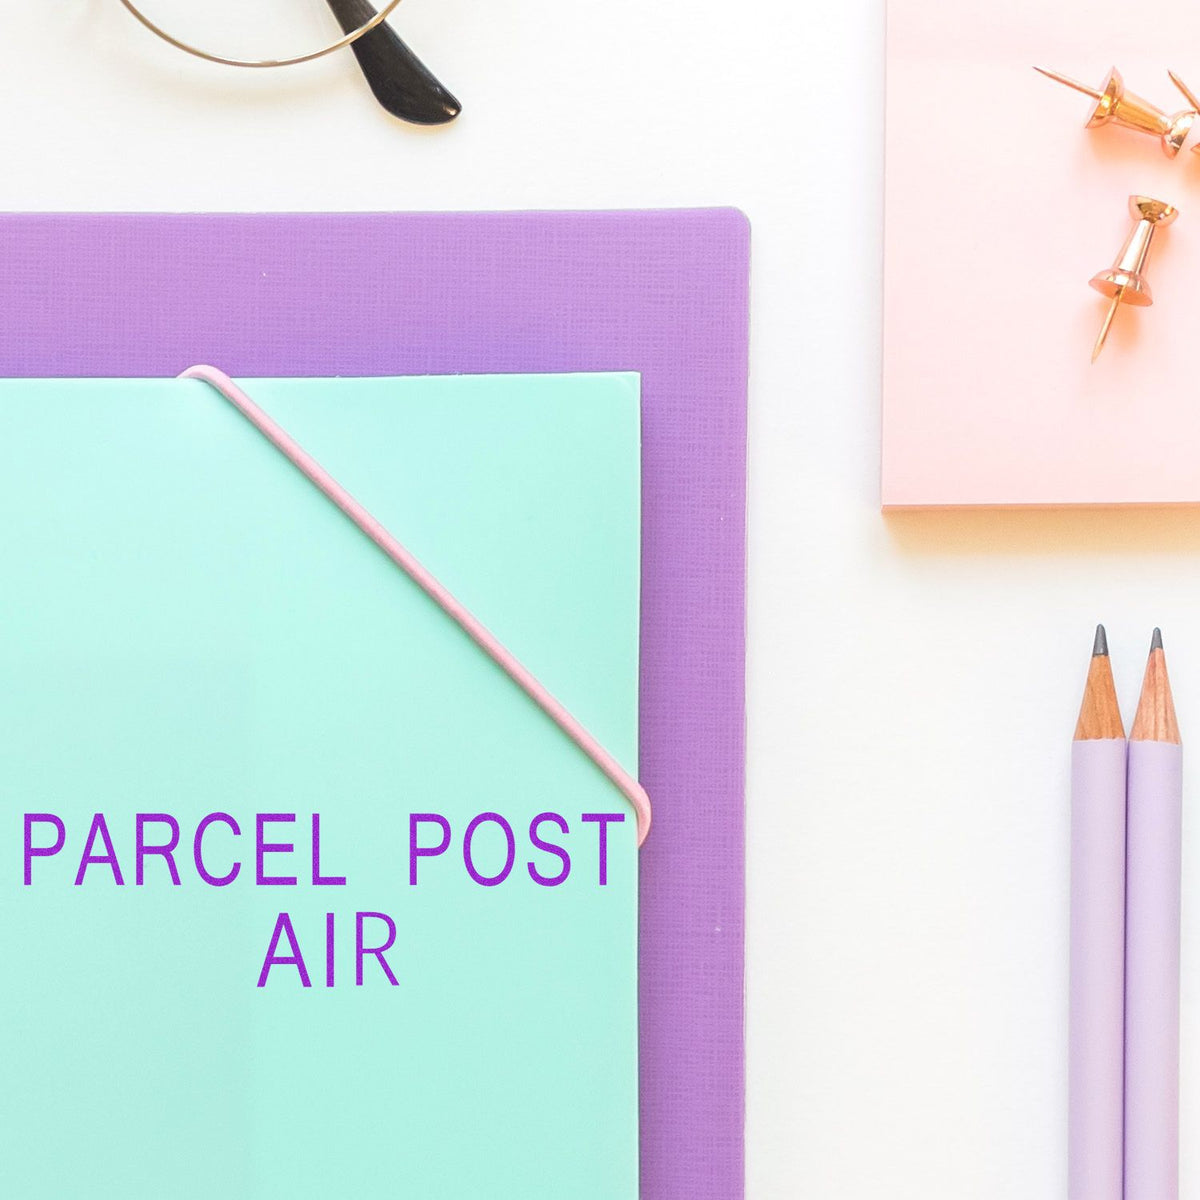 Large Self-Inking Parcel Post Air Stamp In Use